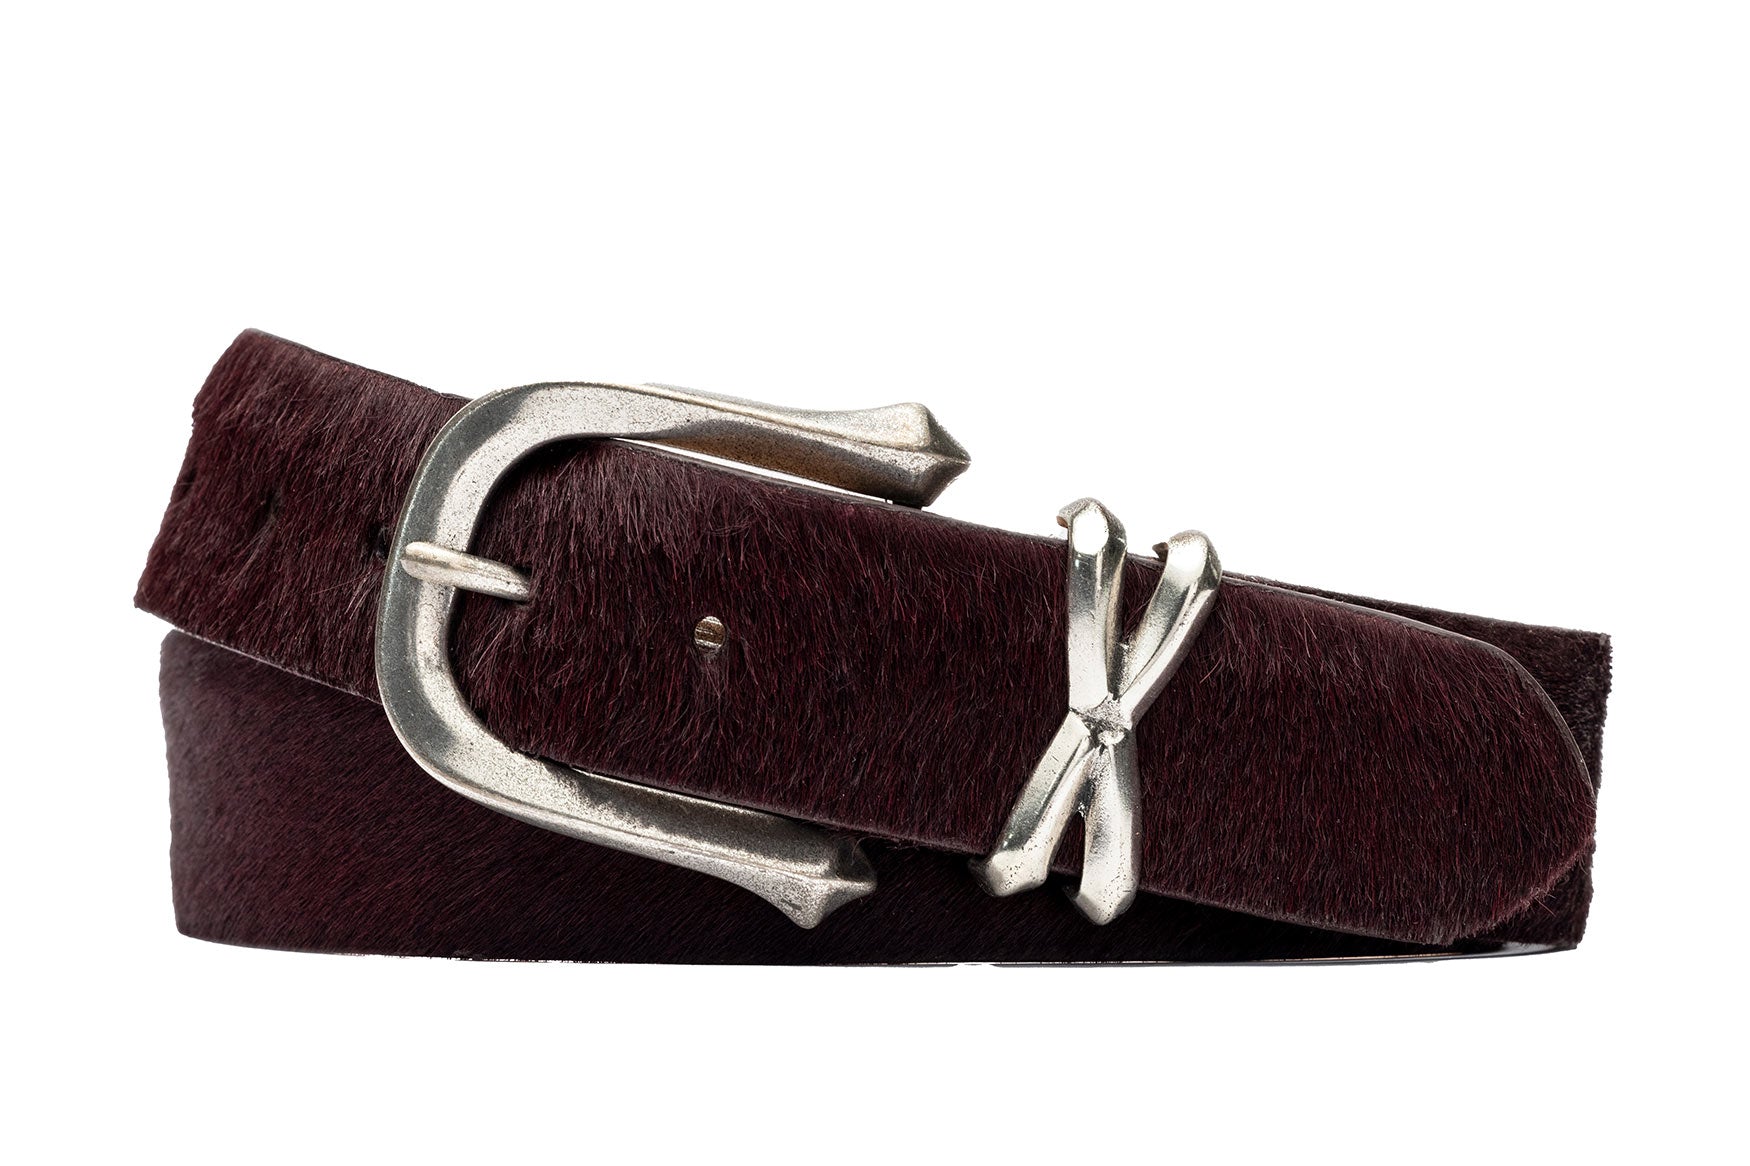 Hair Calf Belt with Antique Nickel Buckle and Keeper Set